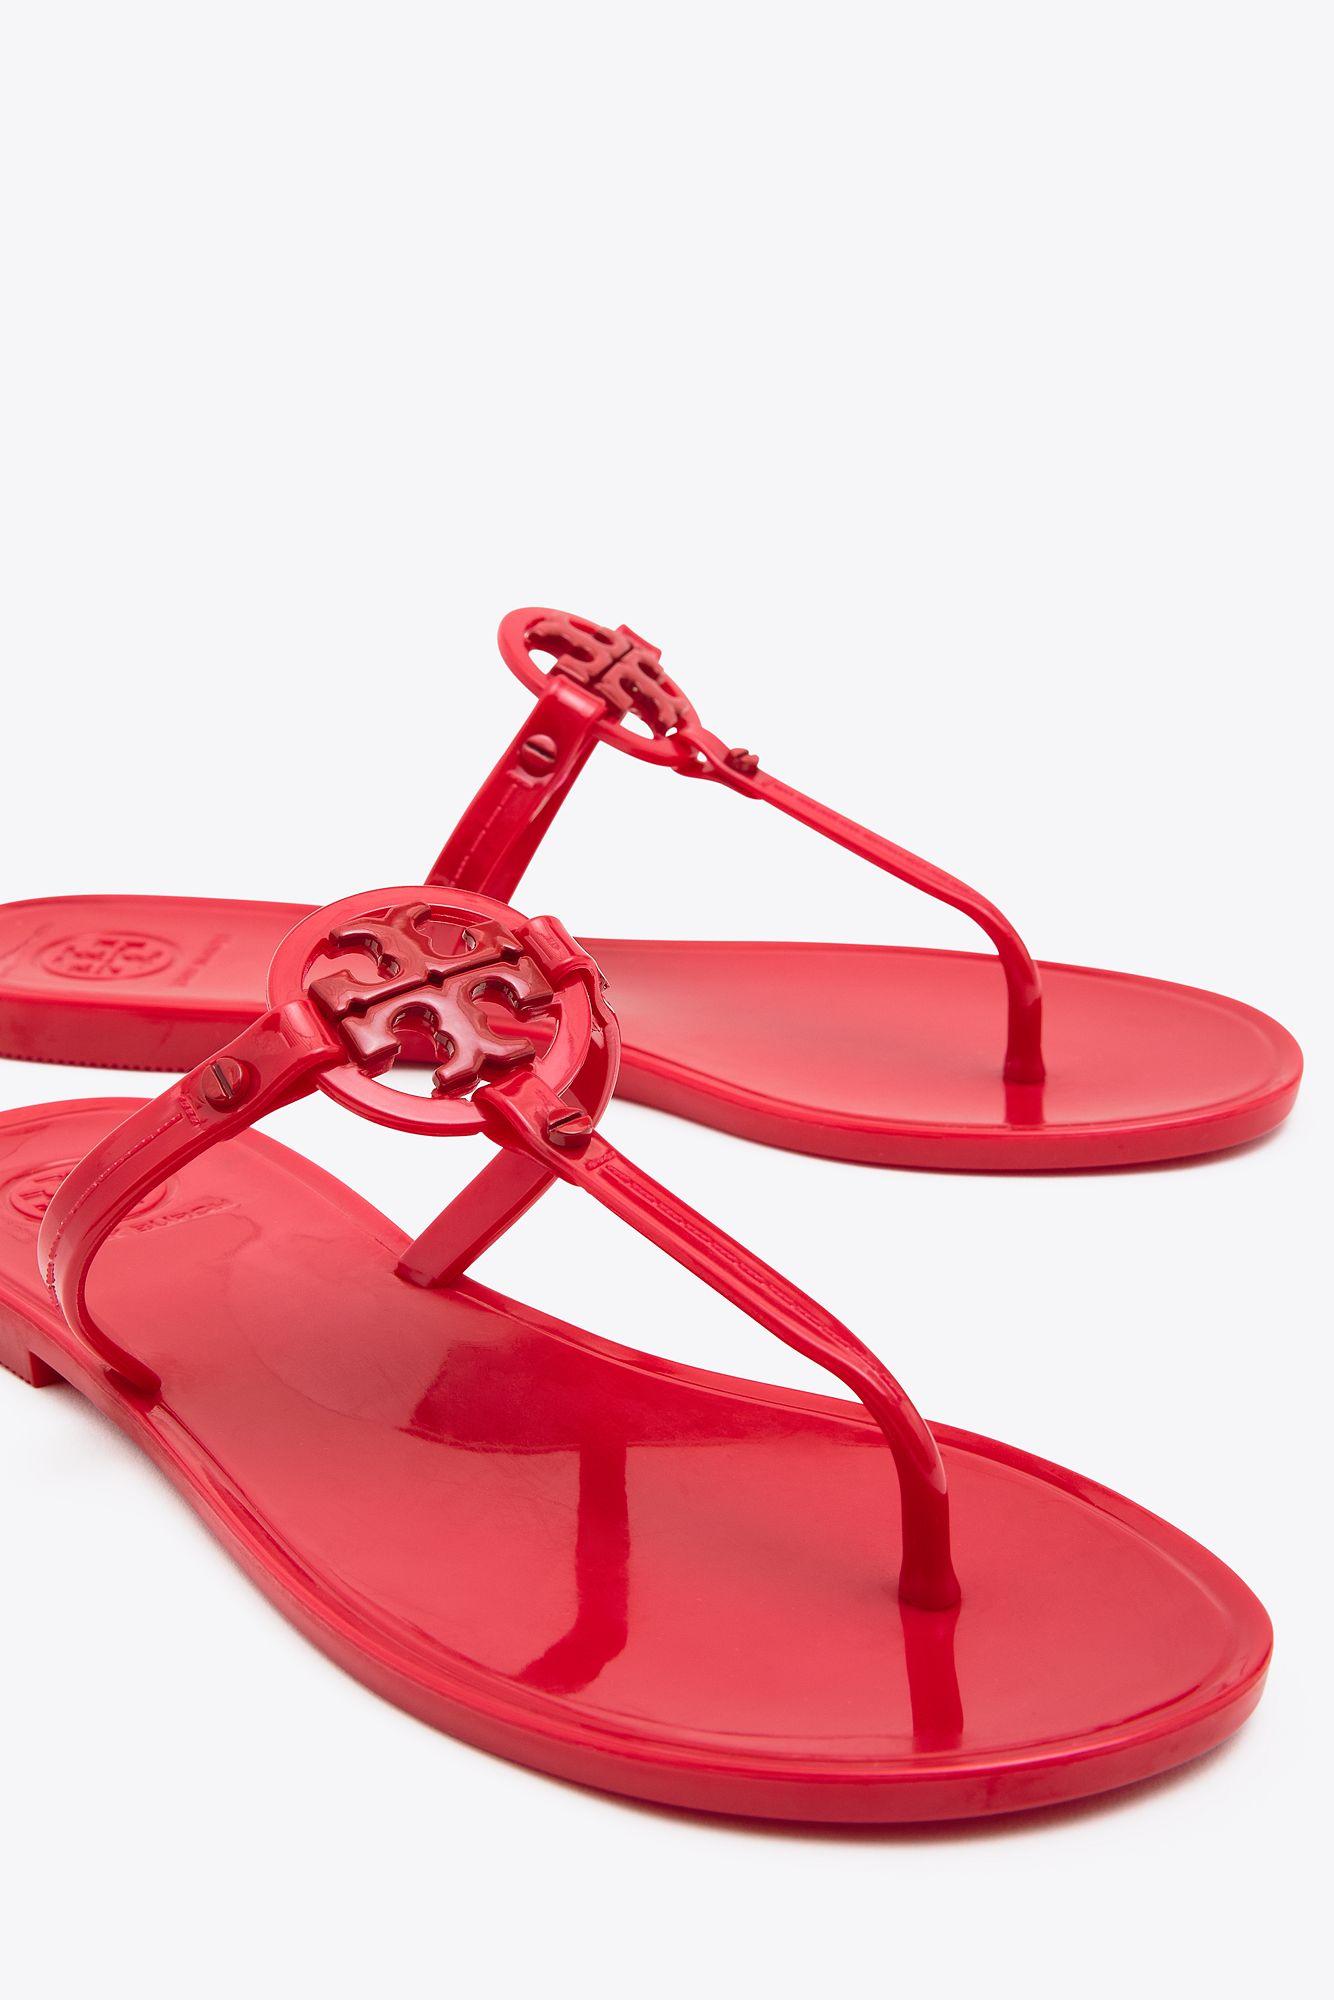 Tory Burch Mini Miller Jelly Thong Sandals in Red - Lyst